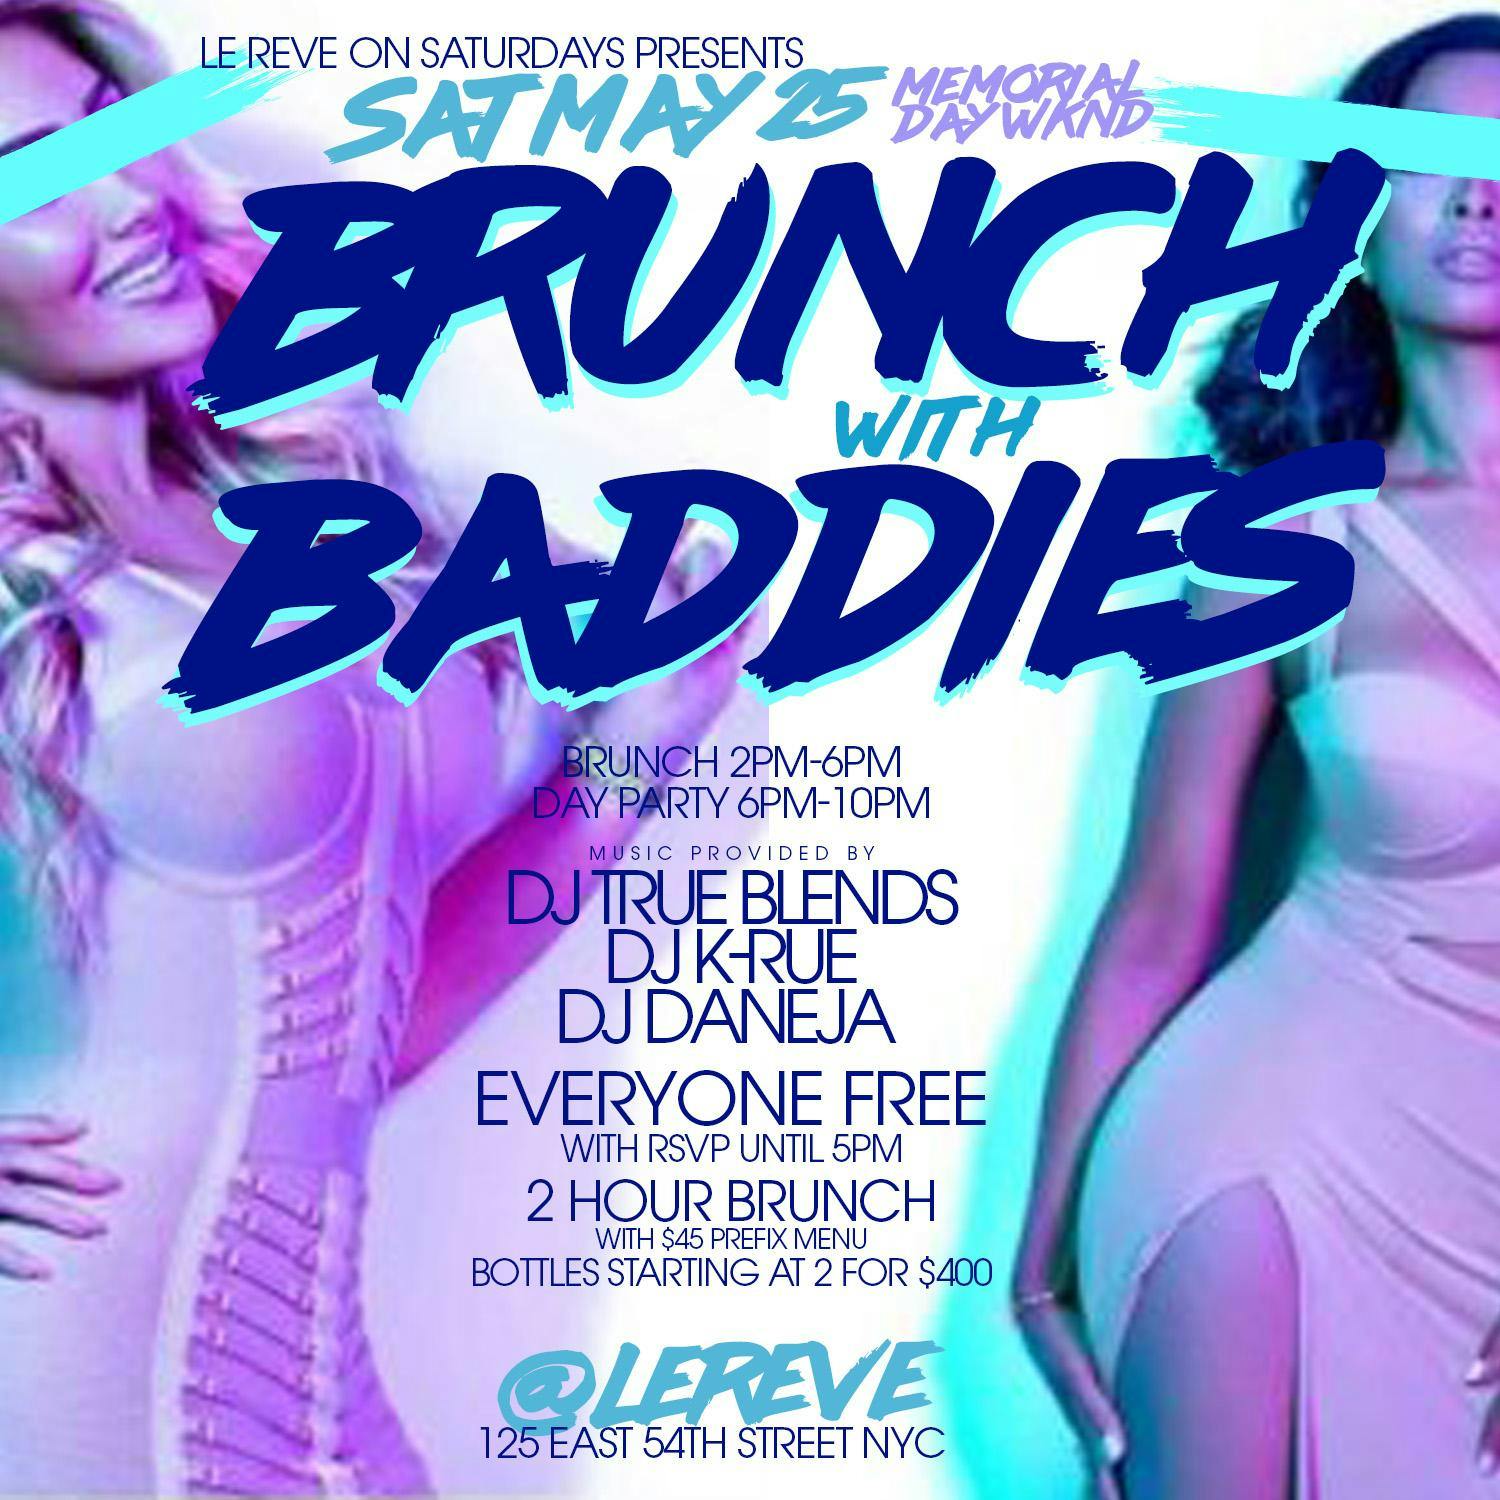 CEO FRESH PRESENTS:  BRUNCH WITH BADDIES  (BRUNCH & DAY PARTY) AT LE REVE NYC